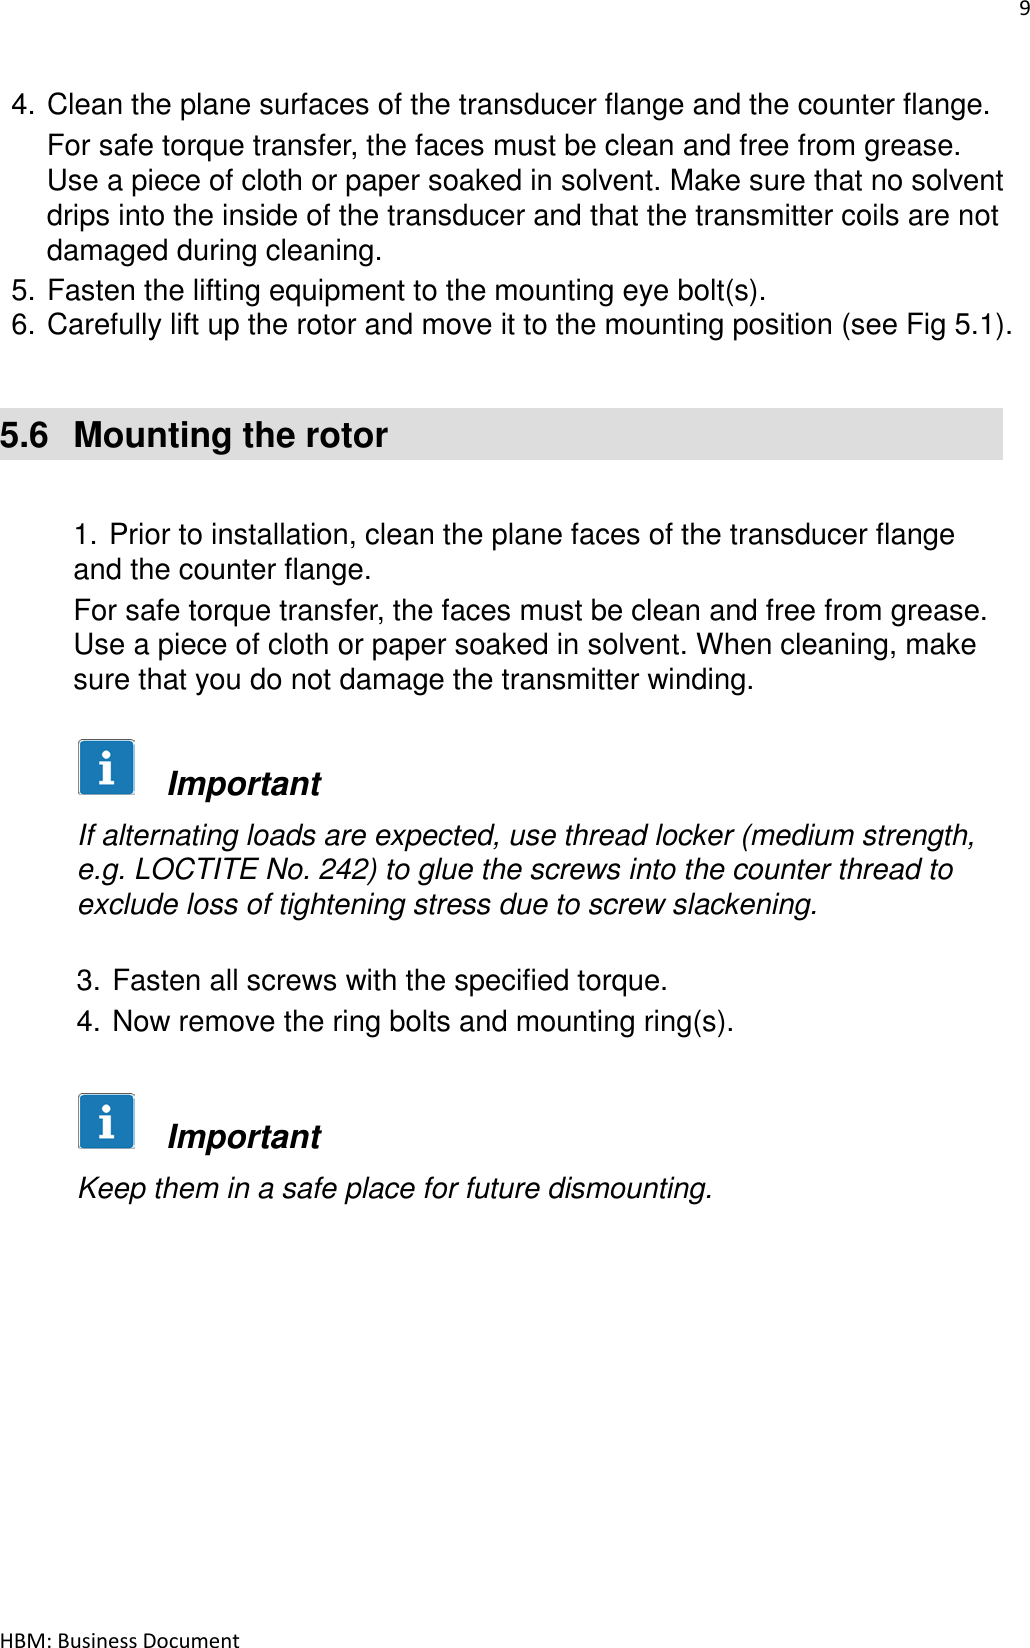 9  HBM: Business Document   4. Clean the plane surfaces of the transducer flange and the counter flange. For safe torque transfer, the faces must be clean and free from grease. Use a piece of cloth or paper soaked in solvent. Make sure that no solvent drips into the inside of the transducer and that the transmitter coils are not damaged during cleaning. 5. Fasten the lifting equipment to the mounting eye bolt(s). 6. Carefully lift up the rotor and move it to the mounting position (see Fig 5.1).    5.6  Mounting the rotor    1. Prior to installation, clean the plane faces of the transducer flange and the counter flange. For safe torque transfer, the faces must be clean and free from grease. Use a piece of cloth or paper soaked in solvent. When cleaning, make sure that you do not damage the transmitter winding.        Important  If alternating loads are expected, use thread locker (medium strength, e.g. LOCTITE No. 242) to glue the screws into the counter thread to exclude loss of tightening stress due to screw slackening.   3. Fasten all screws with the specified torque.  4. Now remove the ring bolts and mounting ring(s).          Important  Keep them in a safe place for future dismounting. 